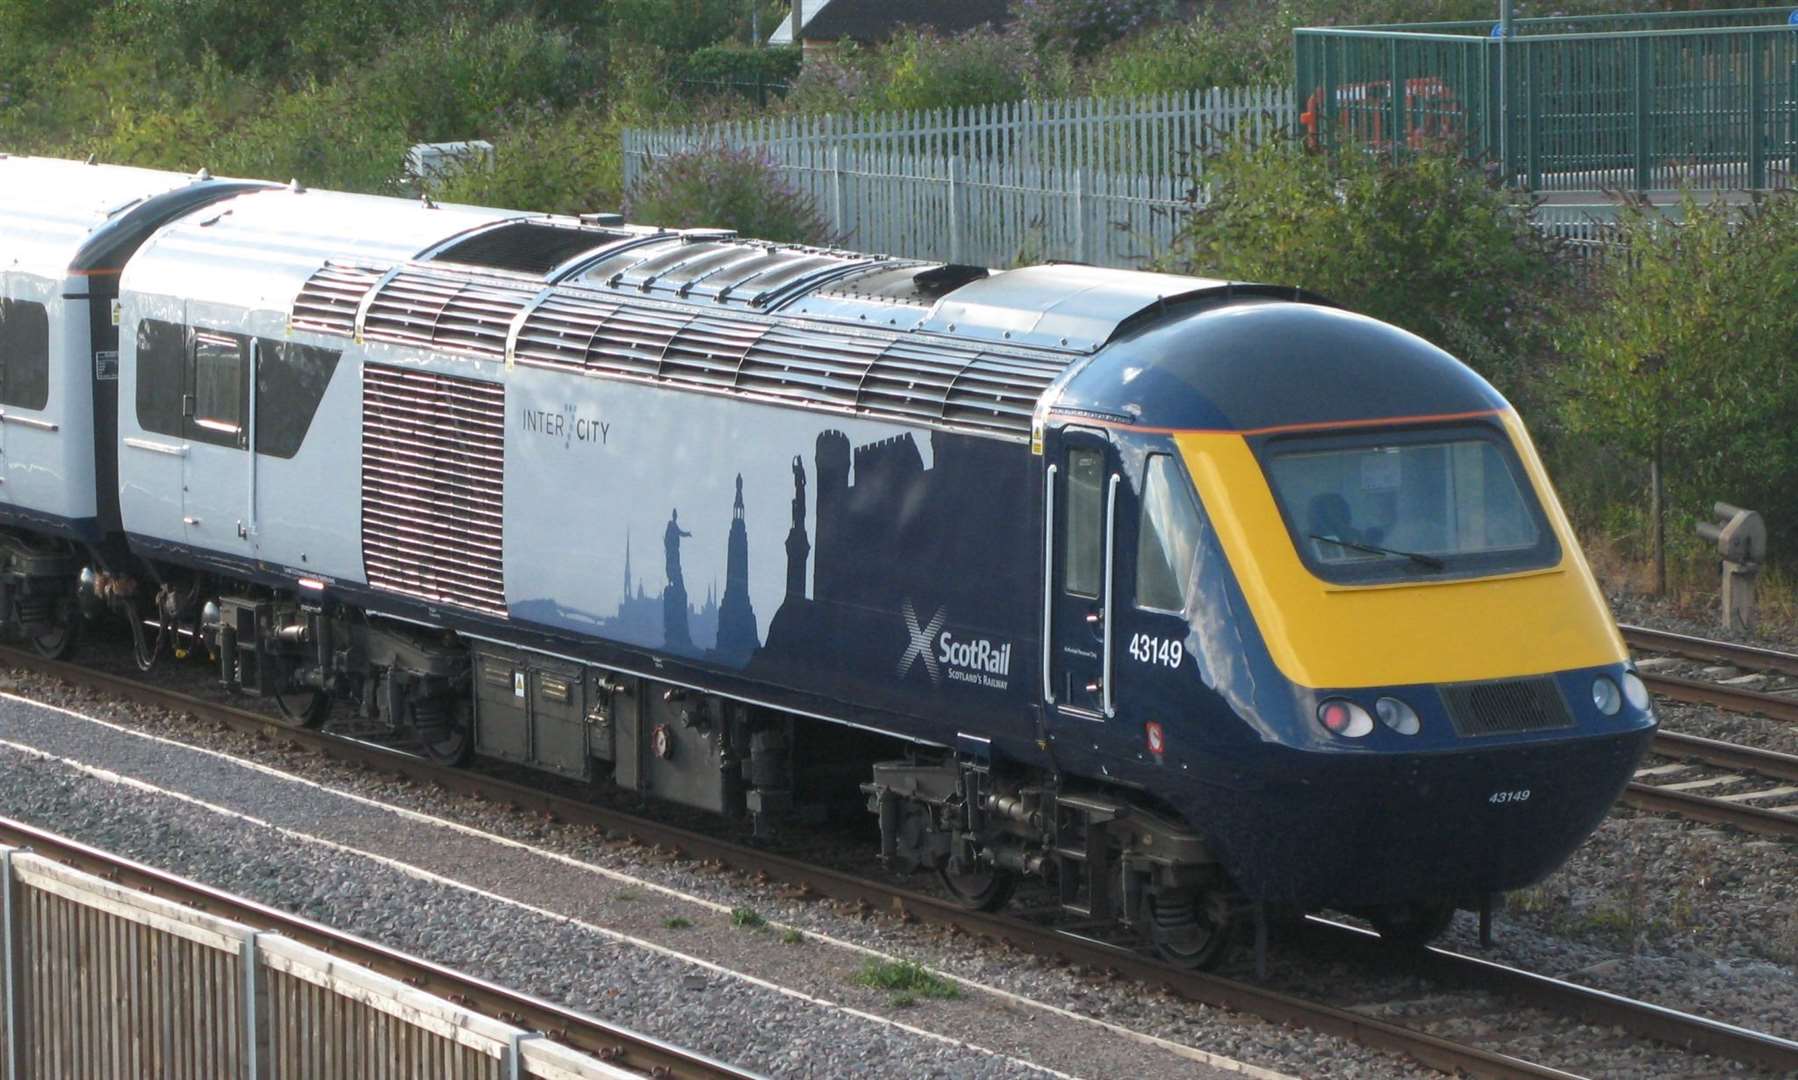 A ScotRail liveried InterCity 125. Picture: Geof Sheppard, via Wikimedia Commons.